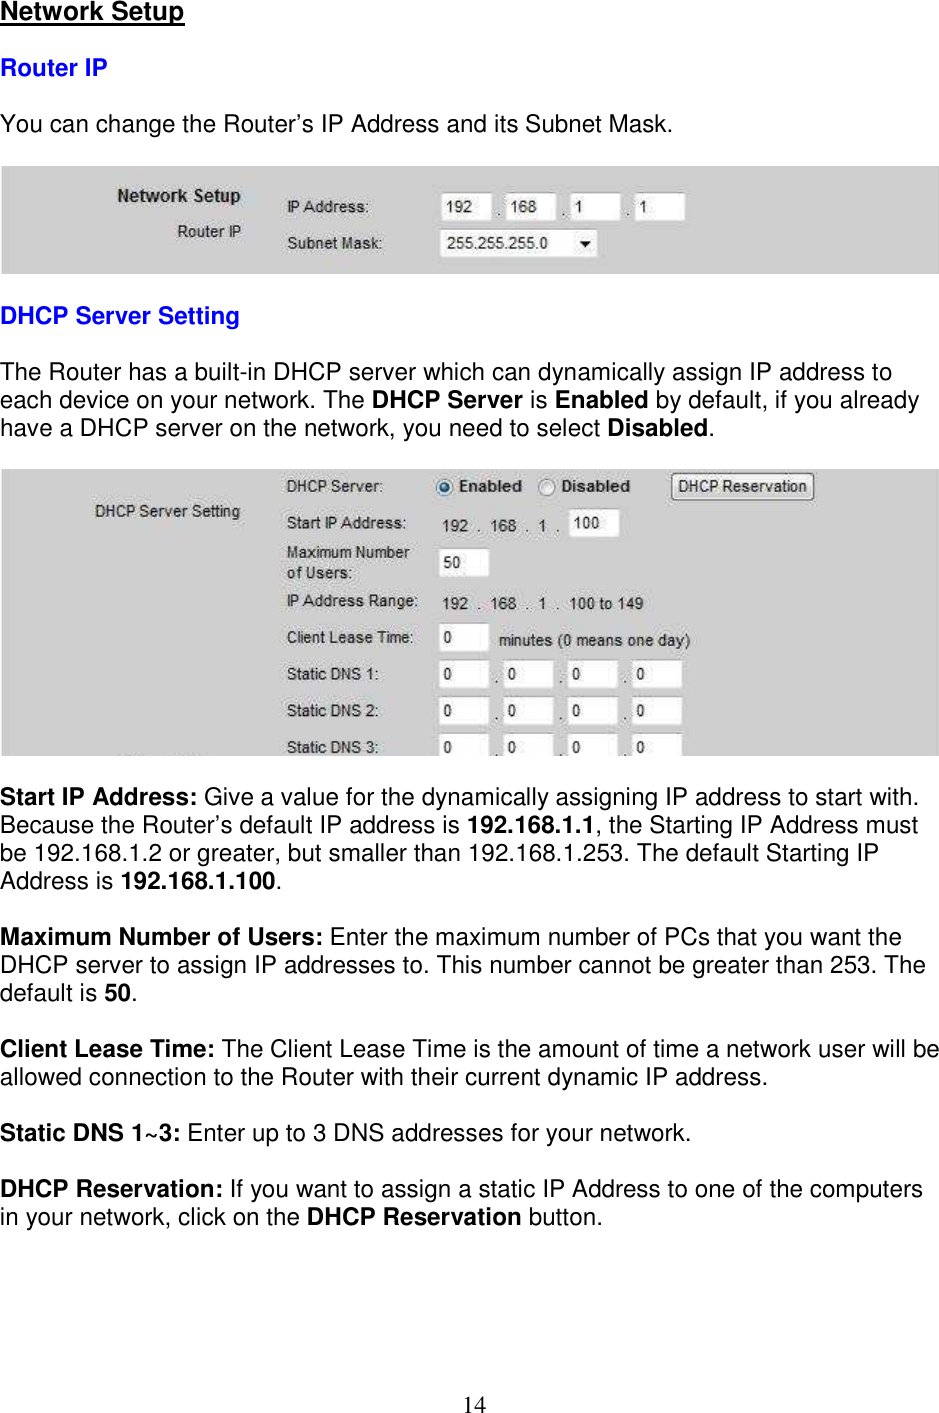 14 Network Setup  Router IP  You can change the Router’s IP Address and its Subnet Mask.    DHCP Server Setting  The Router has a built-in DHCP server which can dynamically assign IP address to each device on your network. The DHCP Server is Enabled by default, if you already have a DHCP server on the network, you need to select Disabled.    Start IP Address: Give a value for the dynamically assigning IP address to start with. Because the Router’s default IP address is 192.168.1.1, the Starting IP Address must be 192.168.1.2 or greater, but smaller than 192.168.1.253. The default Starting IP Address is 192.168.1.100.  Maximum Number of Users: Enter the maximum number of PCs that you want the DHCP server to assign IP addresses to. This number cannot be greater than 253. The default is 50.  Client Lease Time: The Client Lease Time is the amount of time a network user will be allowed connection to the Router with their current dynamic IP address.  Static DNS 1~3: Enter up to 3 DNS addresses for your network.  DHCP Reservation: If you want to assign a static IP Address to one of the computers in your network, click on the DHCP Reservation button.  